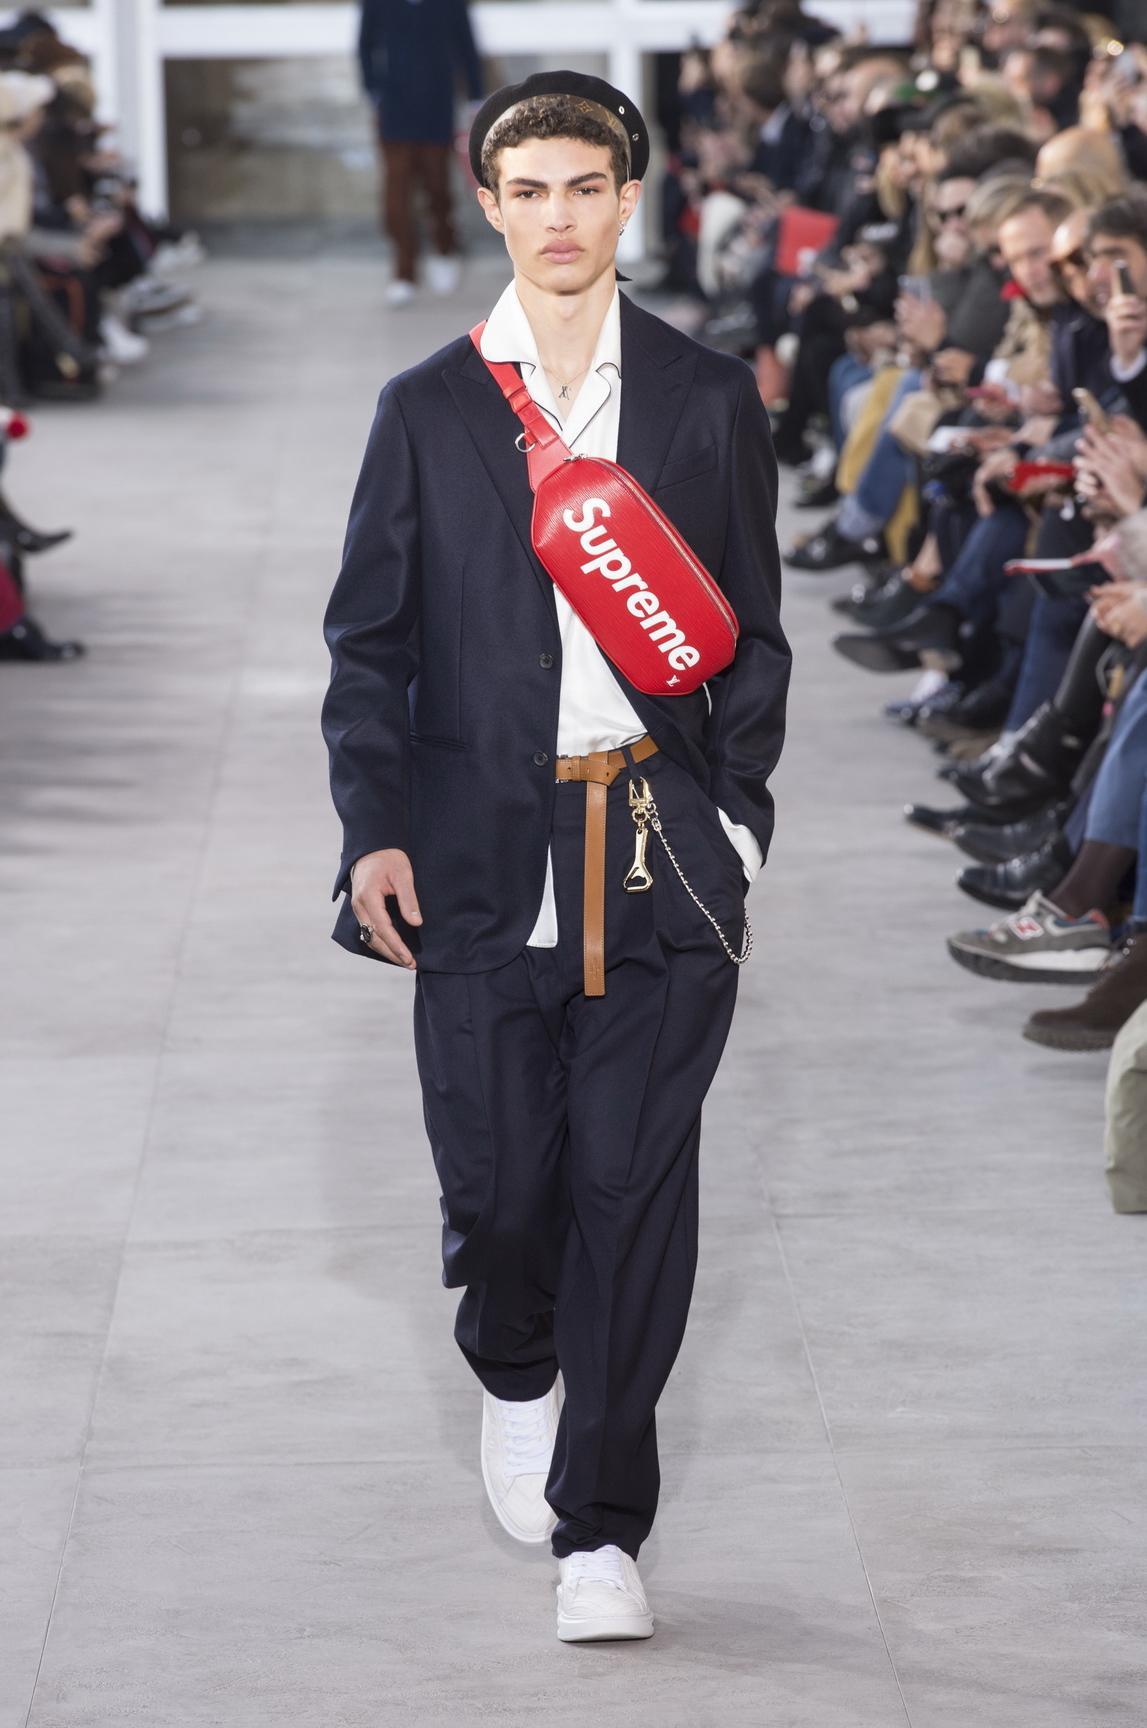 Louis Vuitton - A look from the Louis Vuitton Men's Fall-Winter 2017  Collection by Kim Jones, designed in collaboration with Supreme. Watch the  show now at